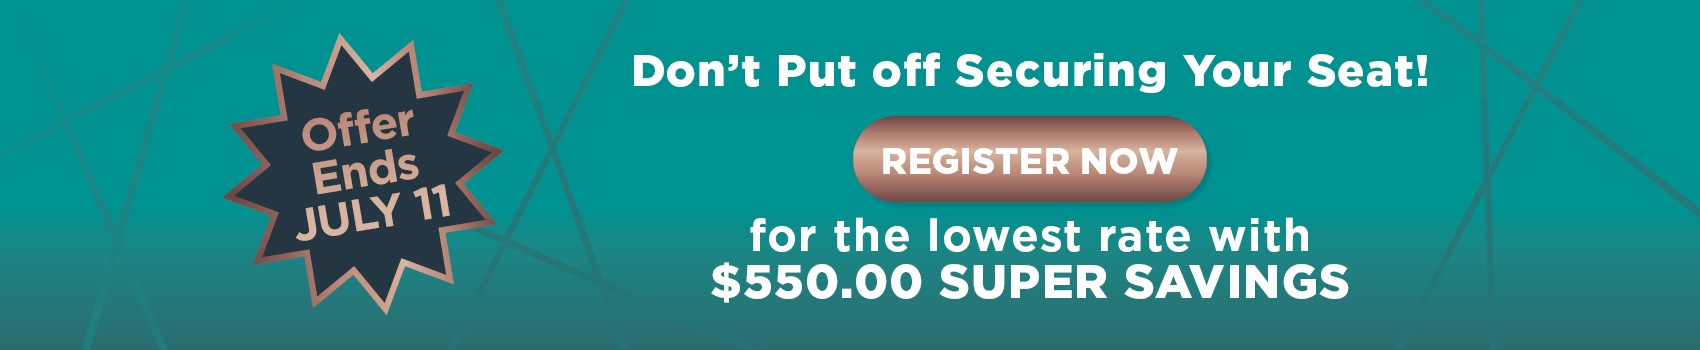 Register now for the lowest rate with $550.00 Super Savings
